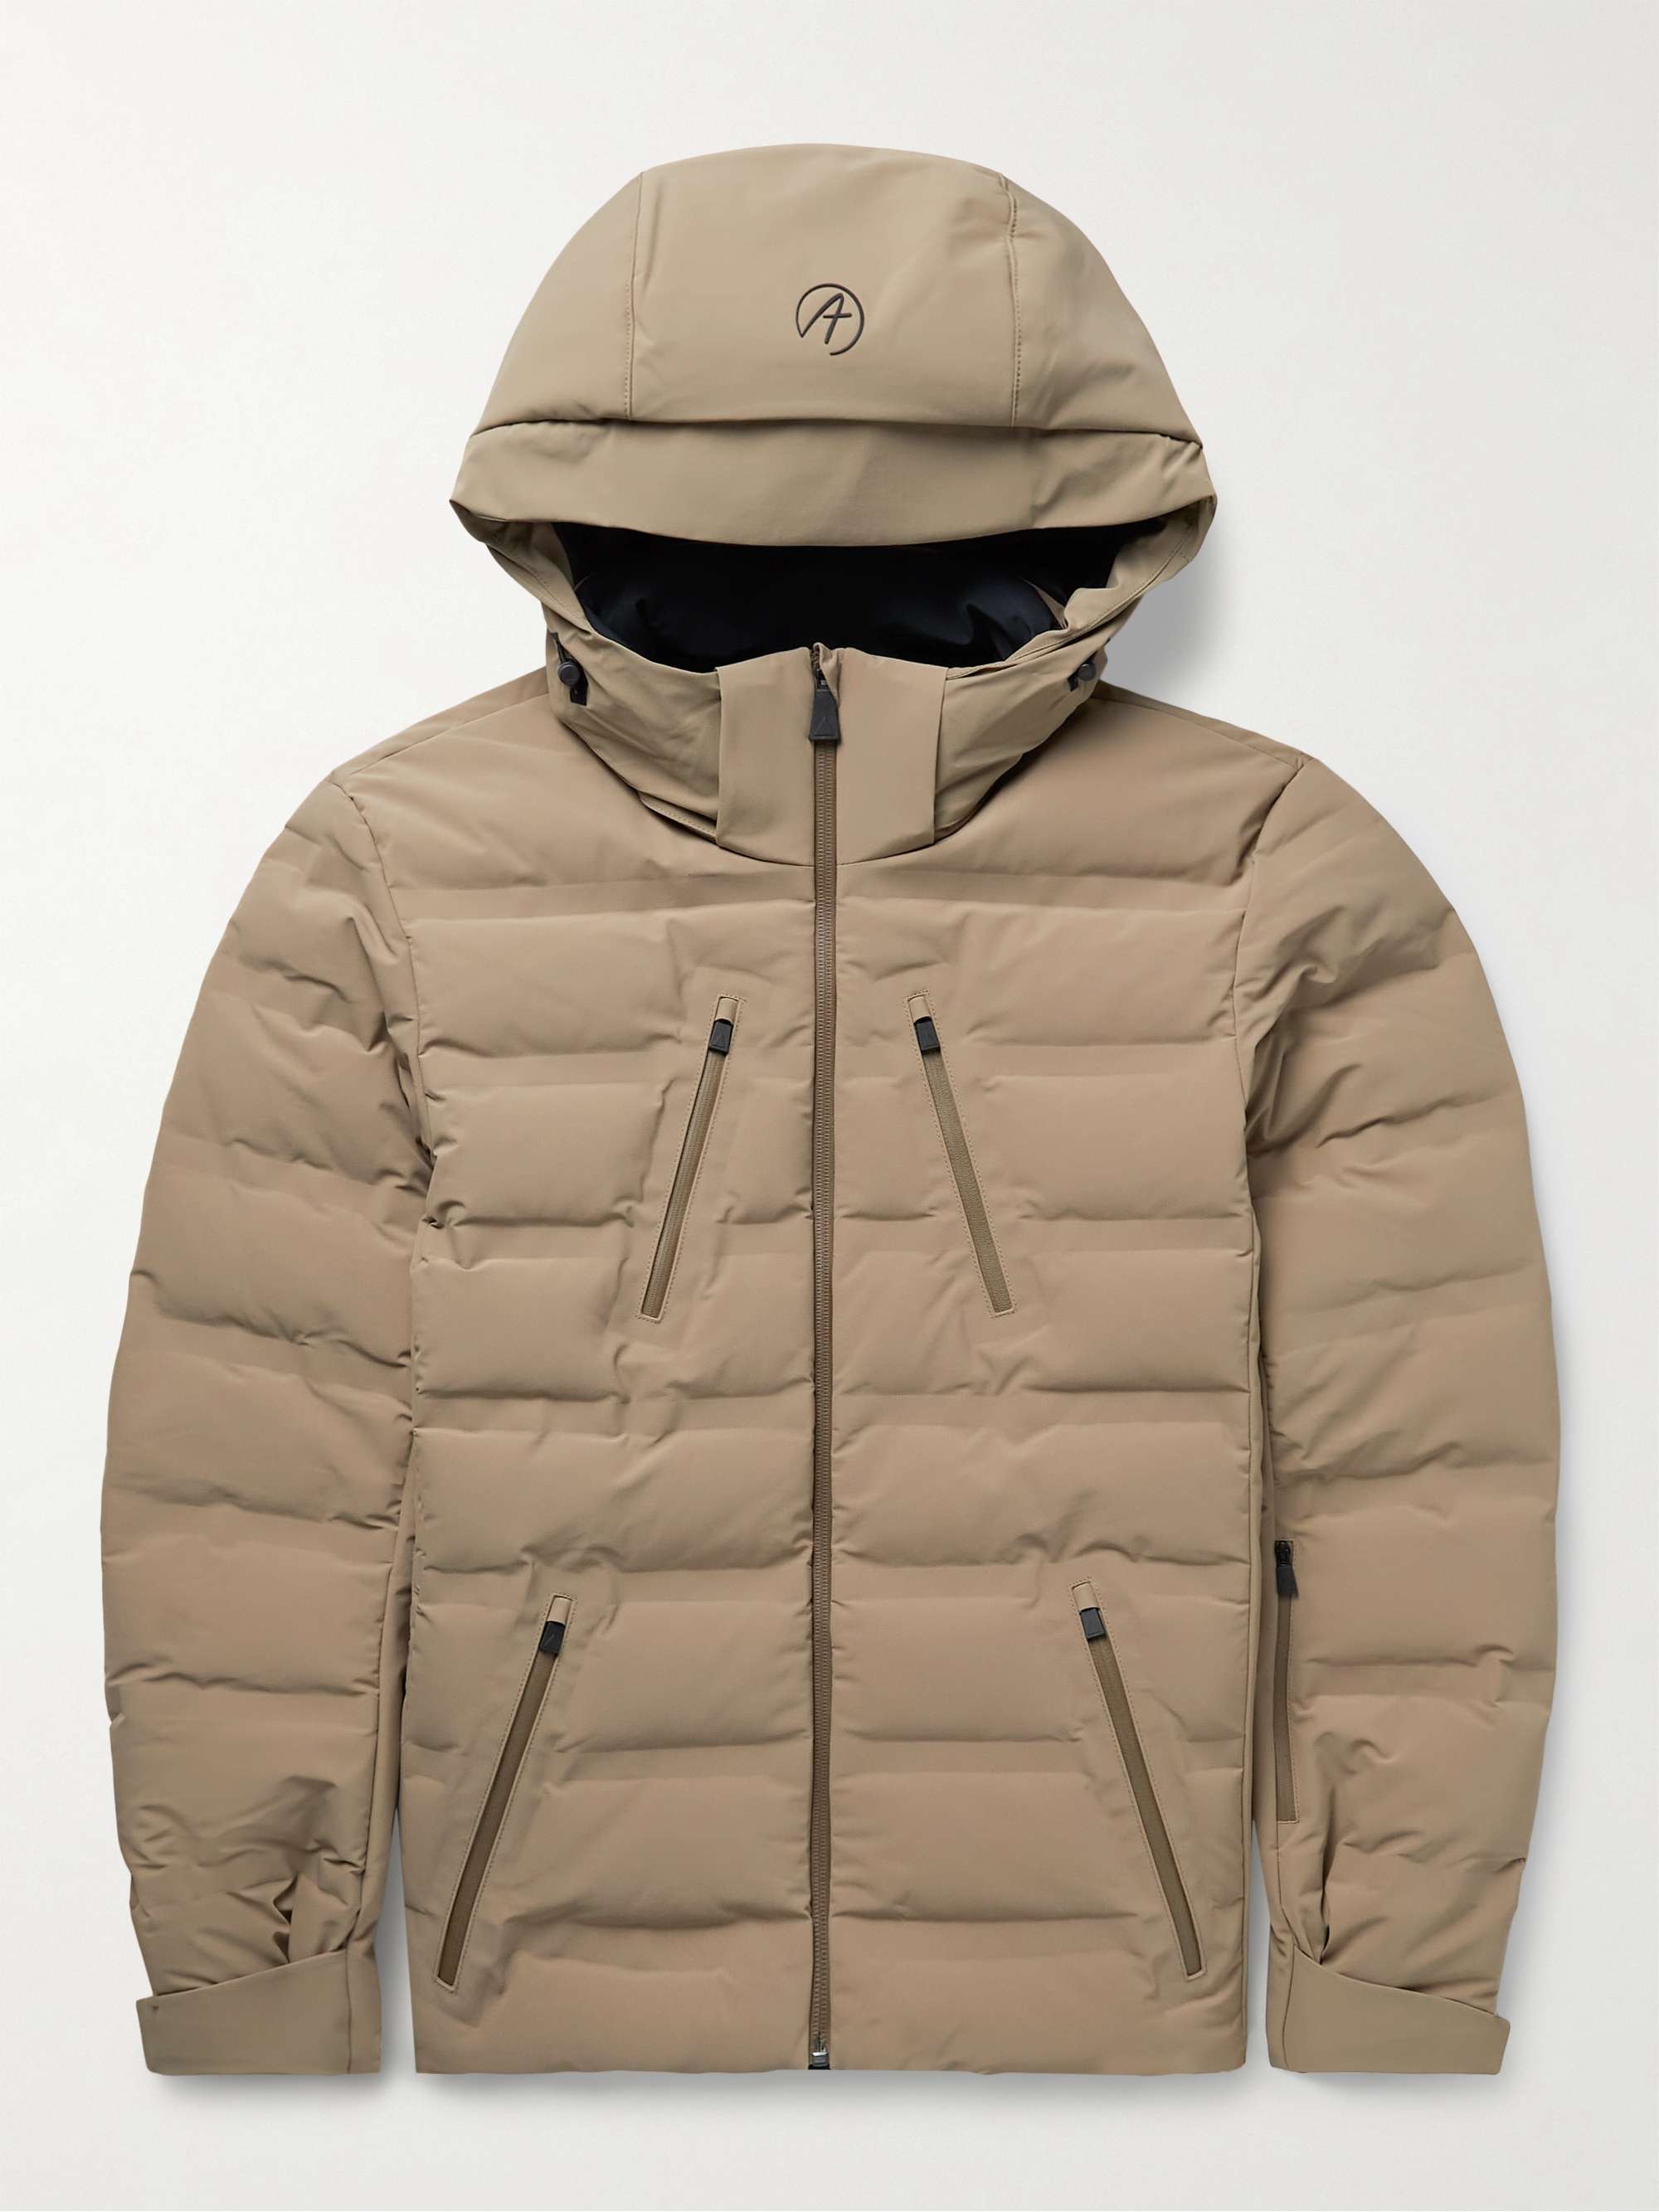 AZTECH MOUNTAIN Nuke Suit Quilted Hooded Down Ski Jacket | MR PORTER